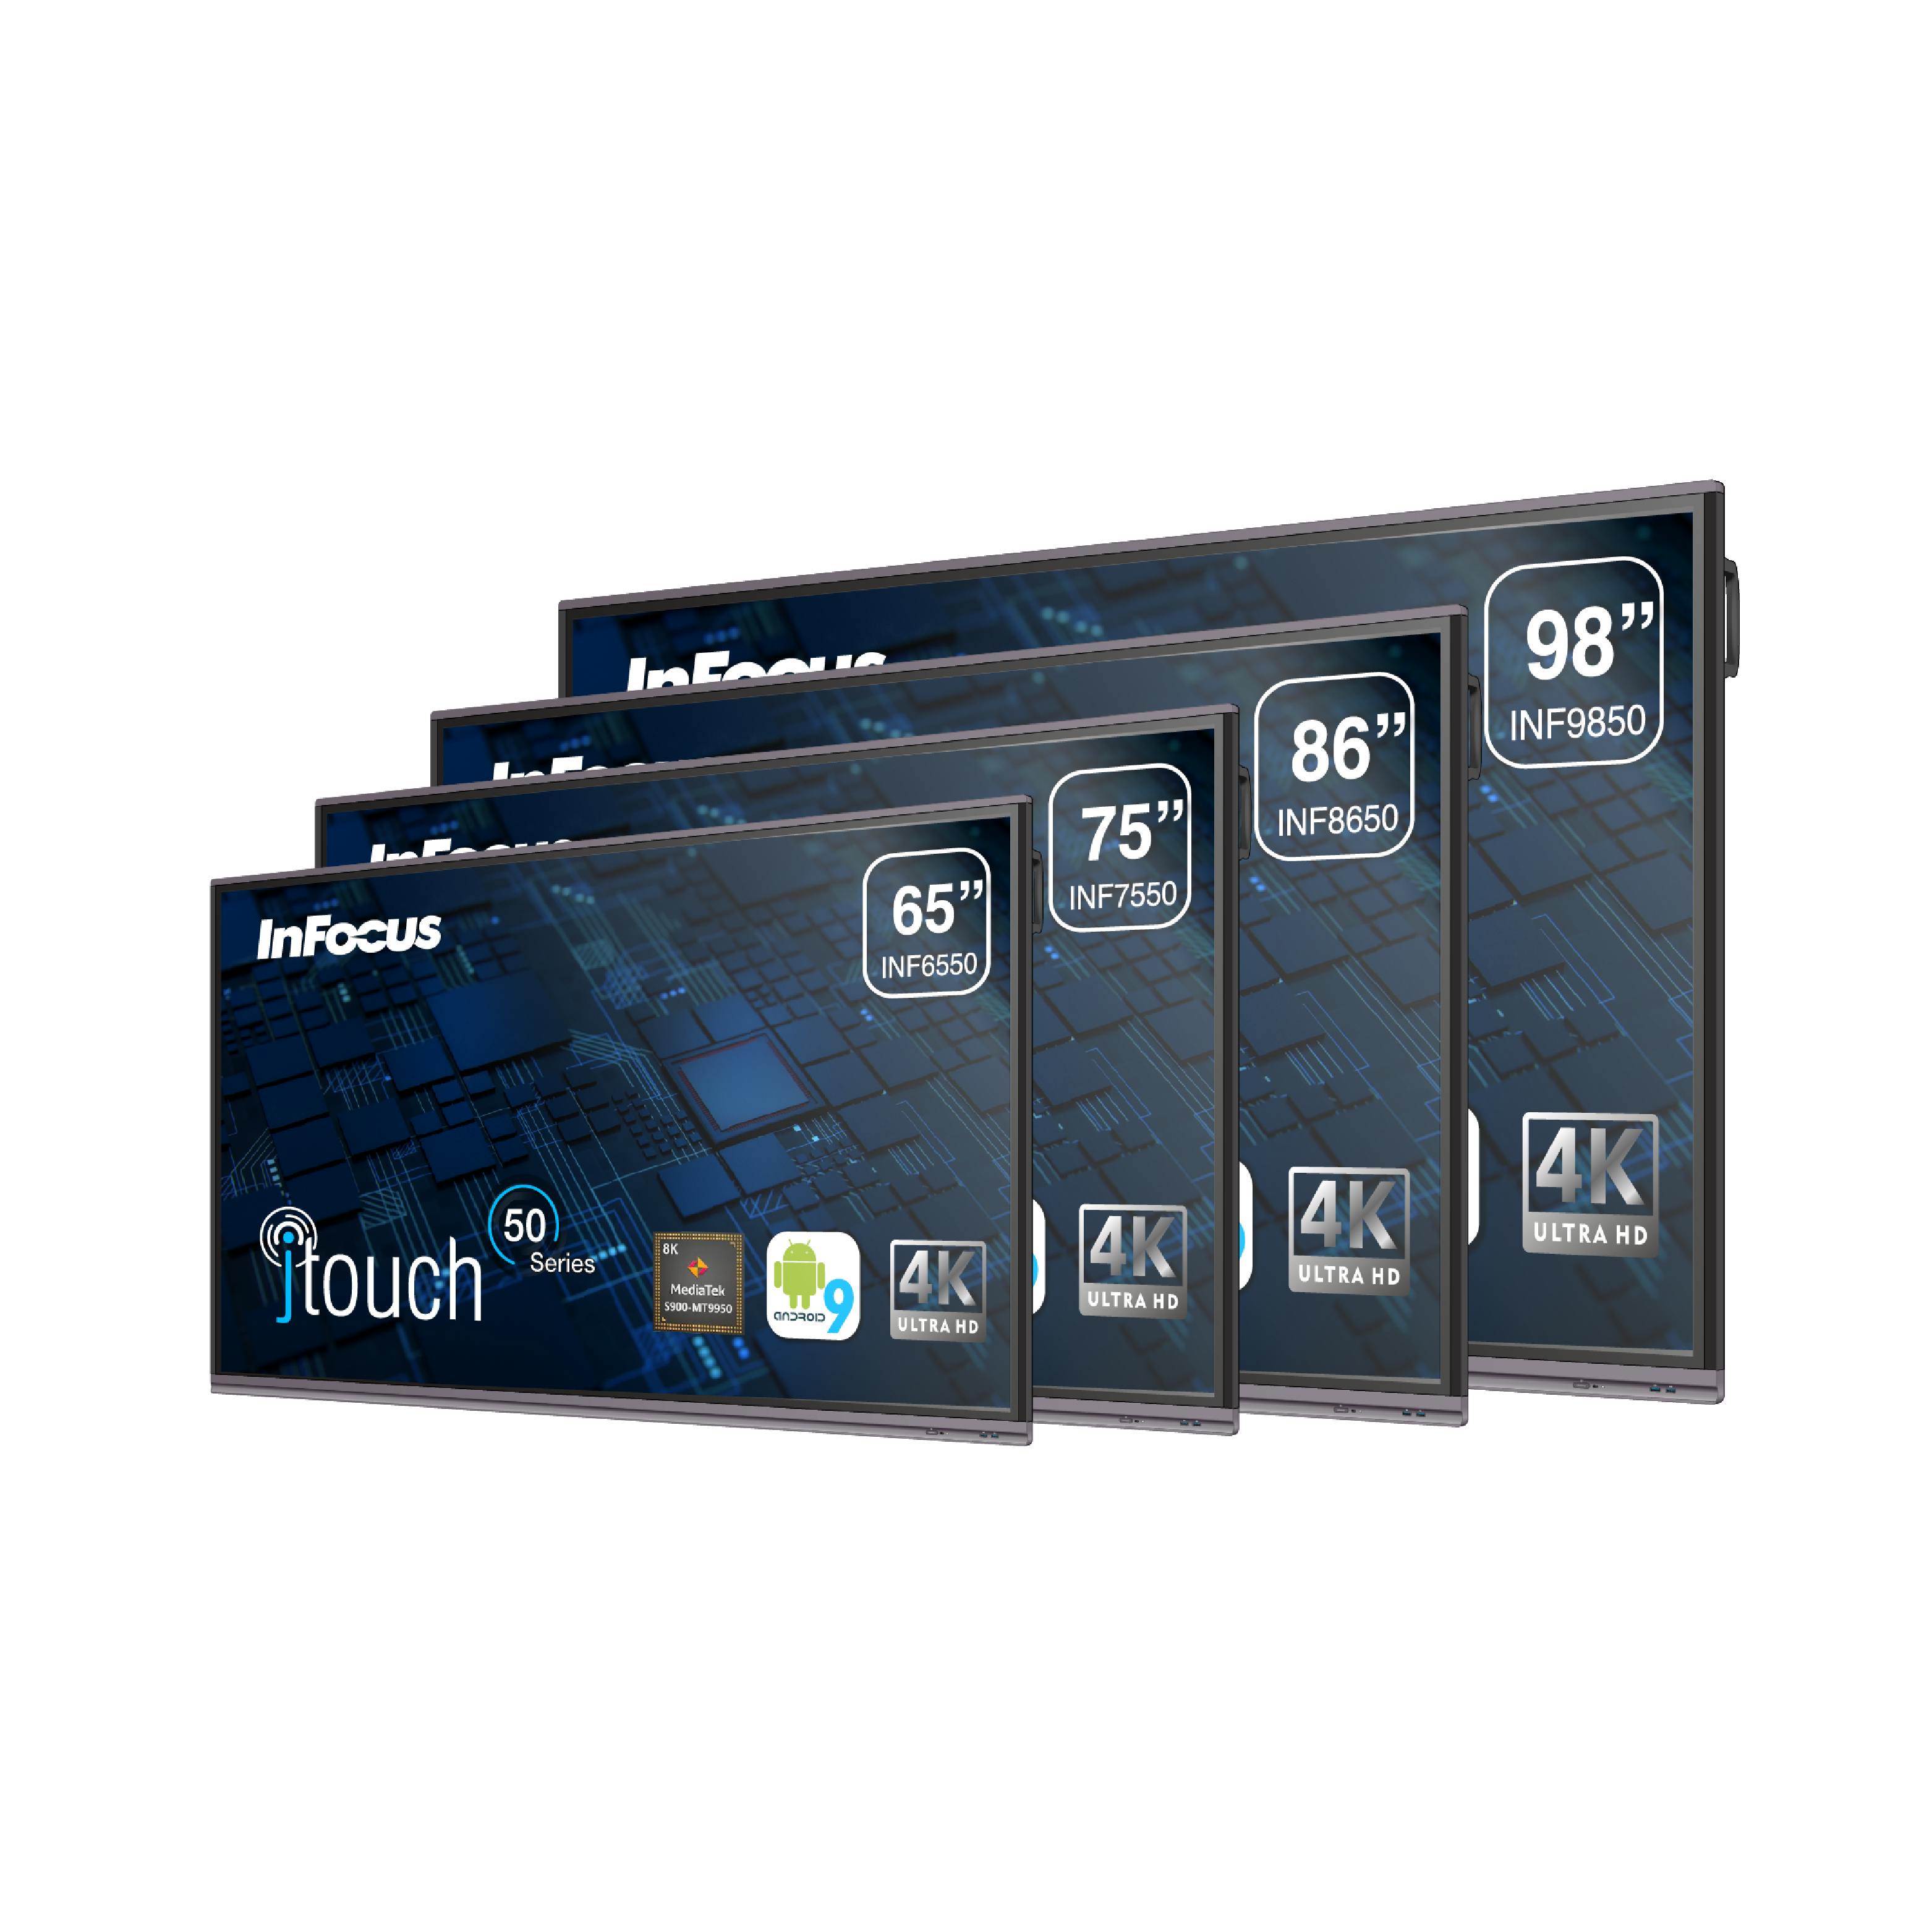 https://infocus.imgix.net/2022/04/JTouch-50-Series_Group_F_90-01.png?auto=compress%2Cformat&ixlib=php-3.3.0